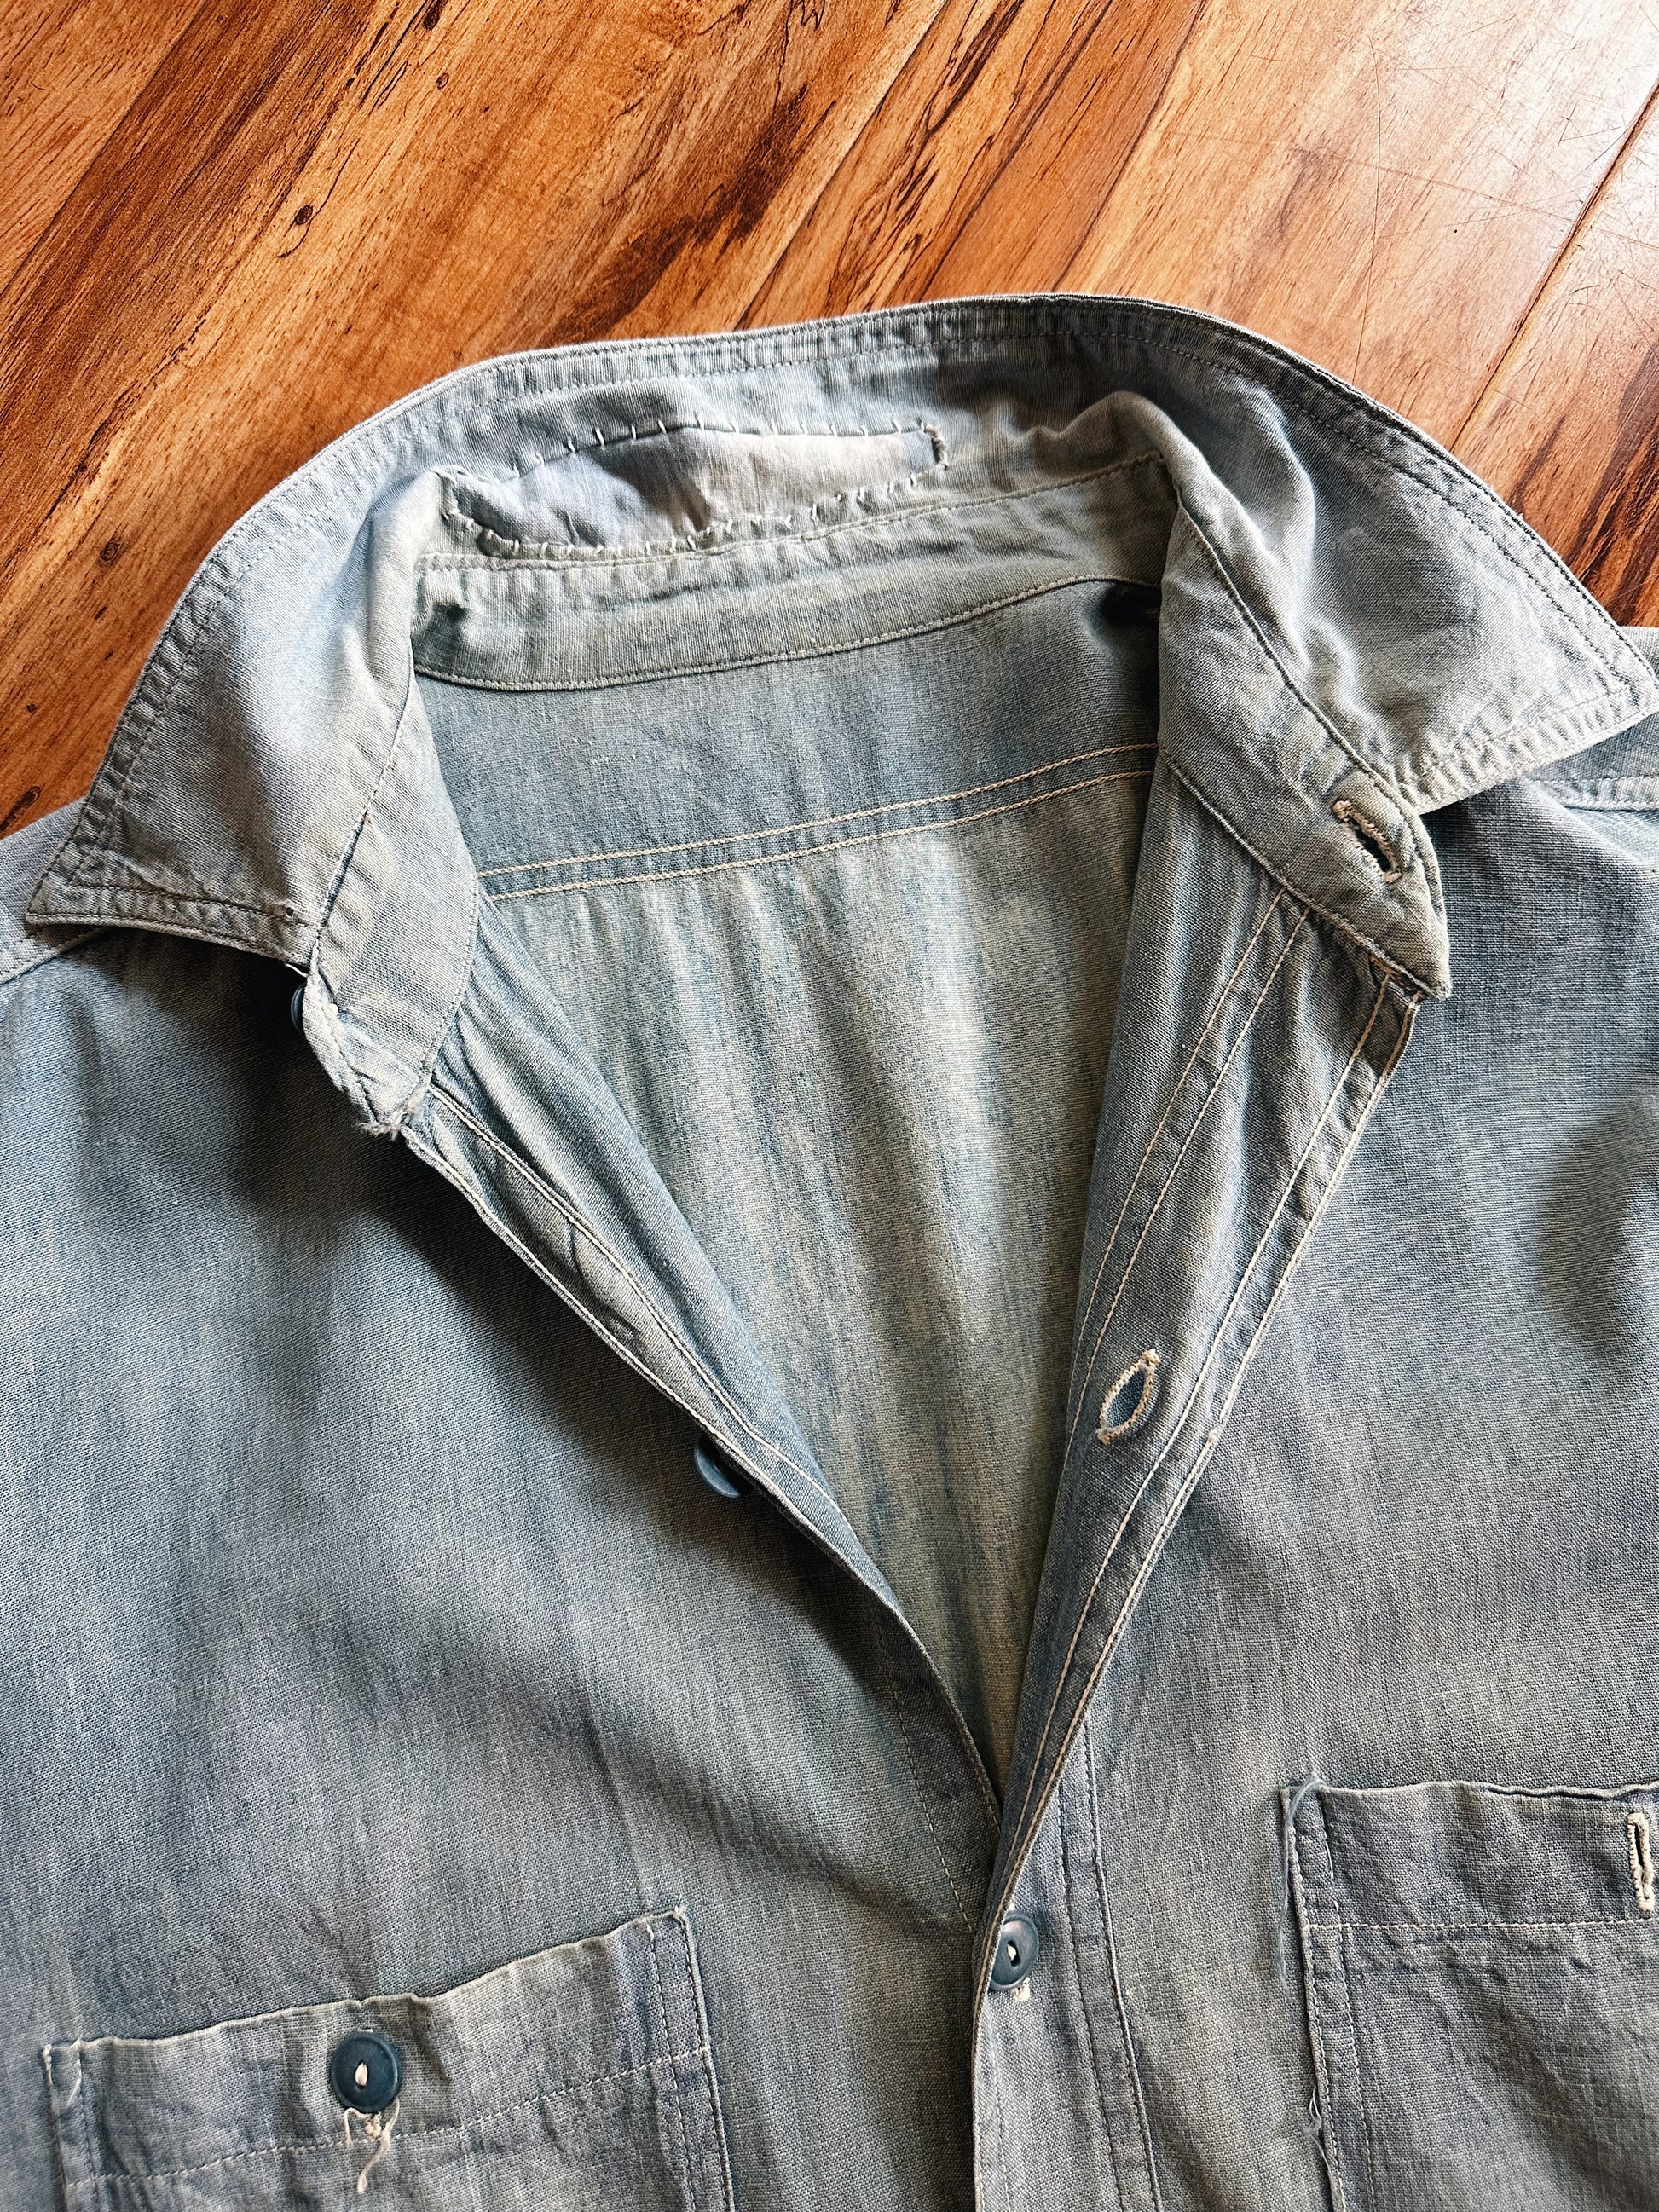 usn ww2 chambray details reparation collar 